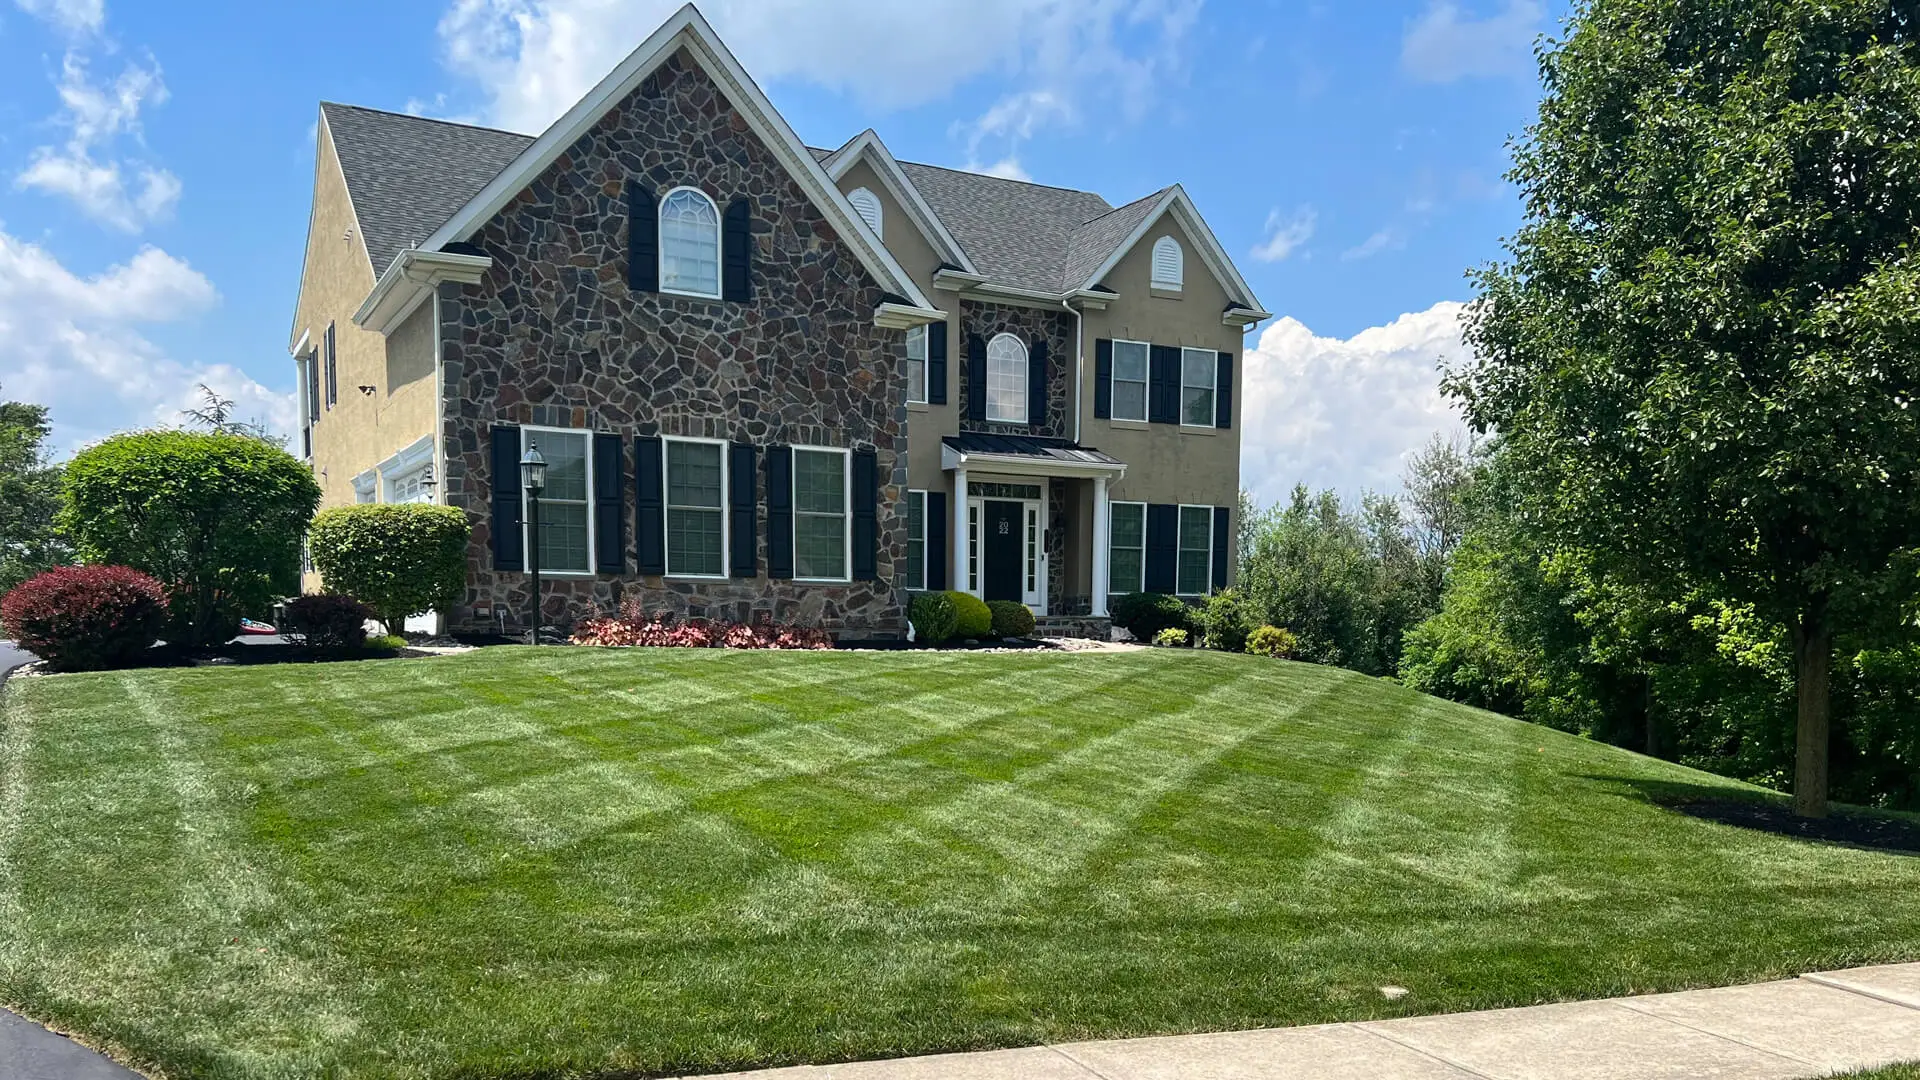 Thick, green lawn grass up close at a home in Abington Township, PA.